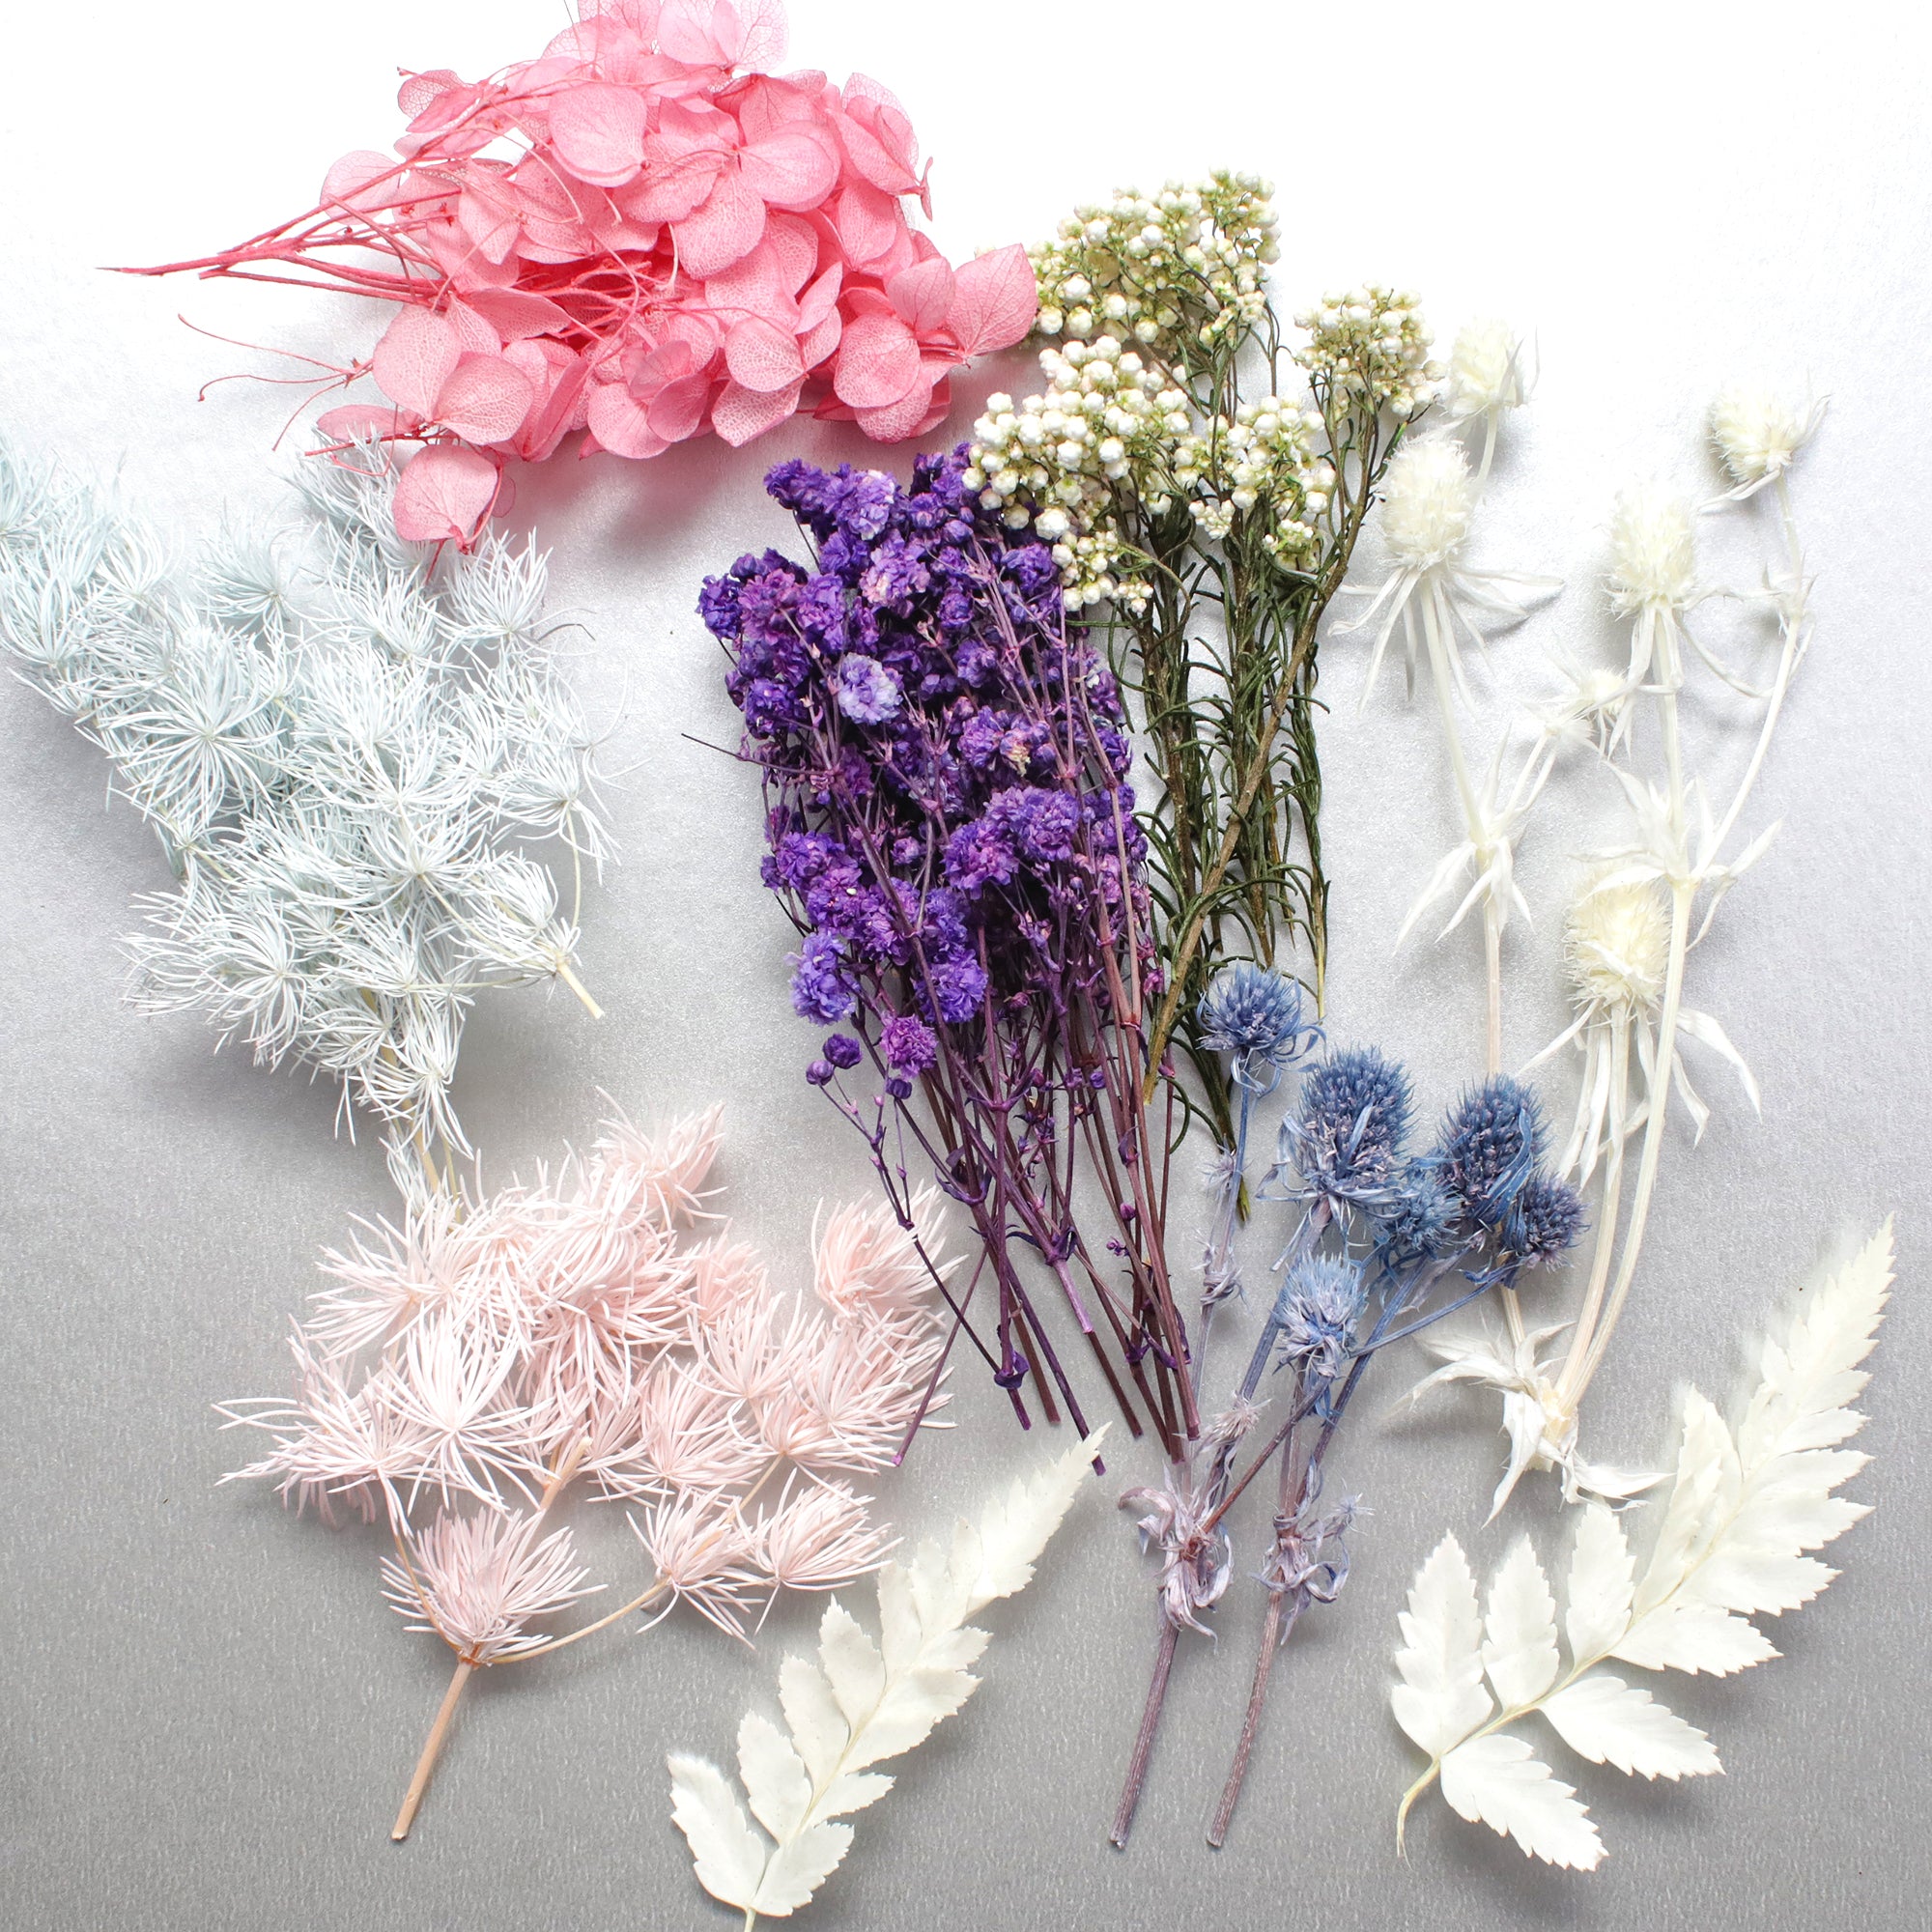 Resin Art Natural Dried Flowers Showy Blossoms 1 Box Ib